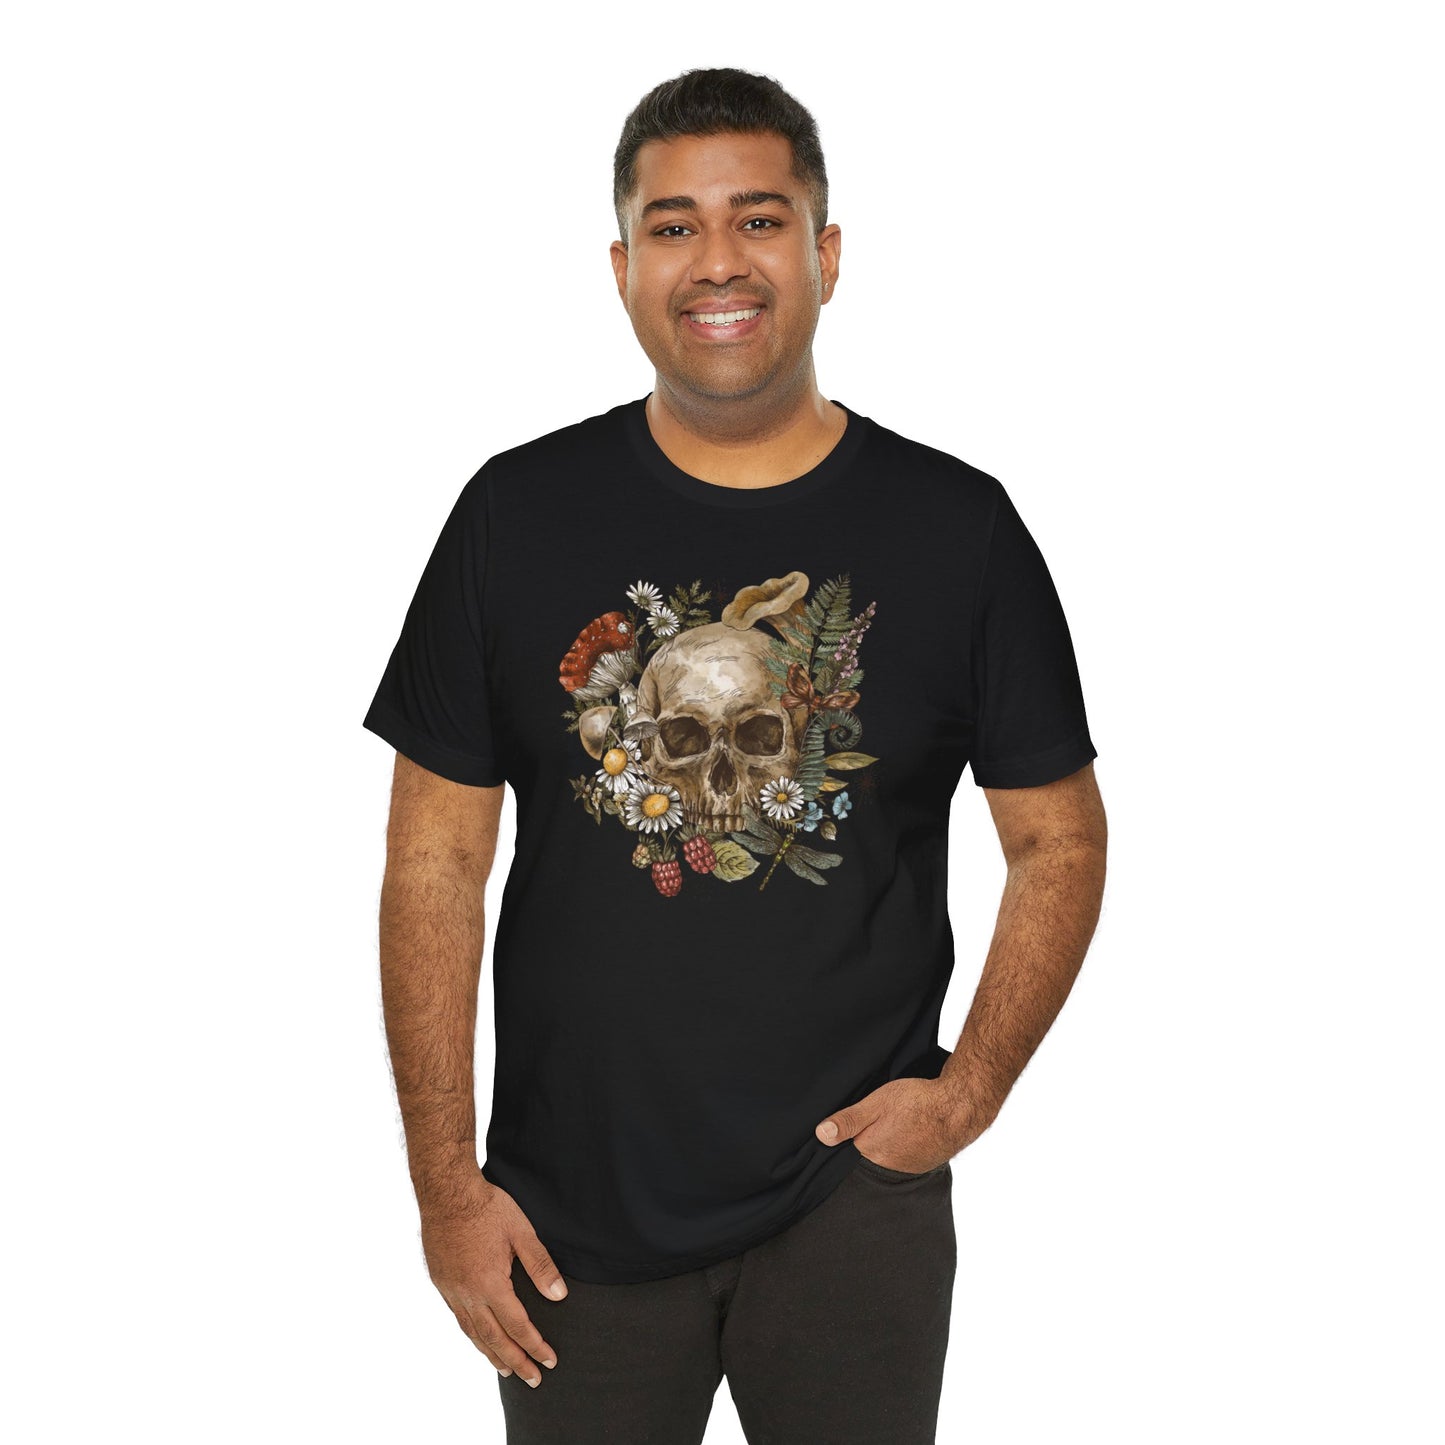 T-Shirt - Skull with Mushrooms Unisex Jersey Short Sleeve Tee, Soft and 100% Cotton, Runs True to Size, Sizes Small to 3XL